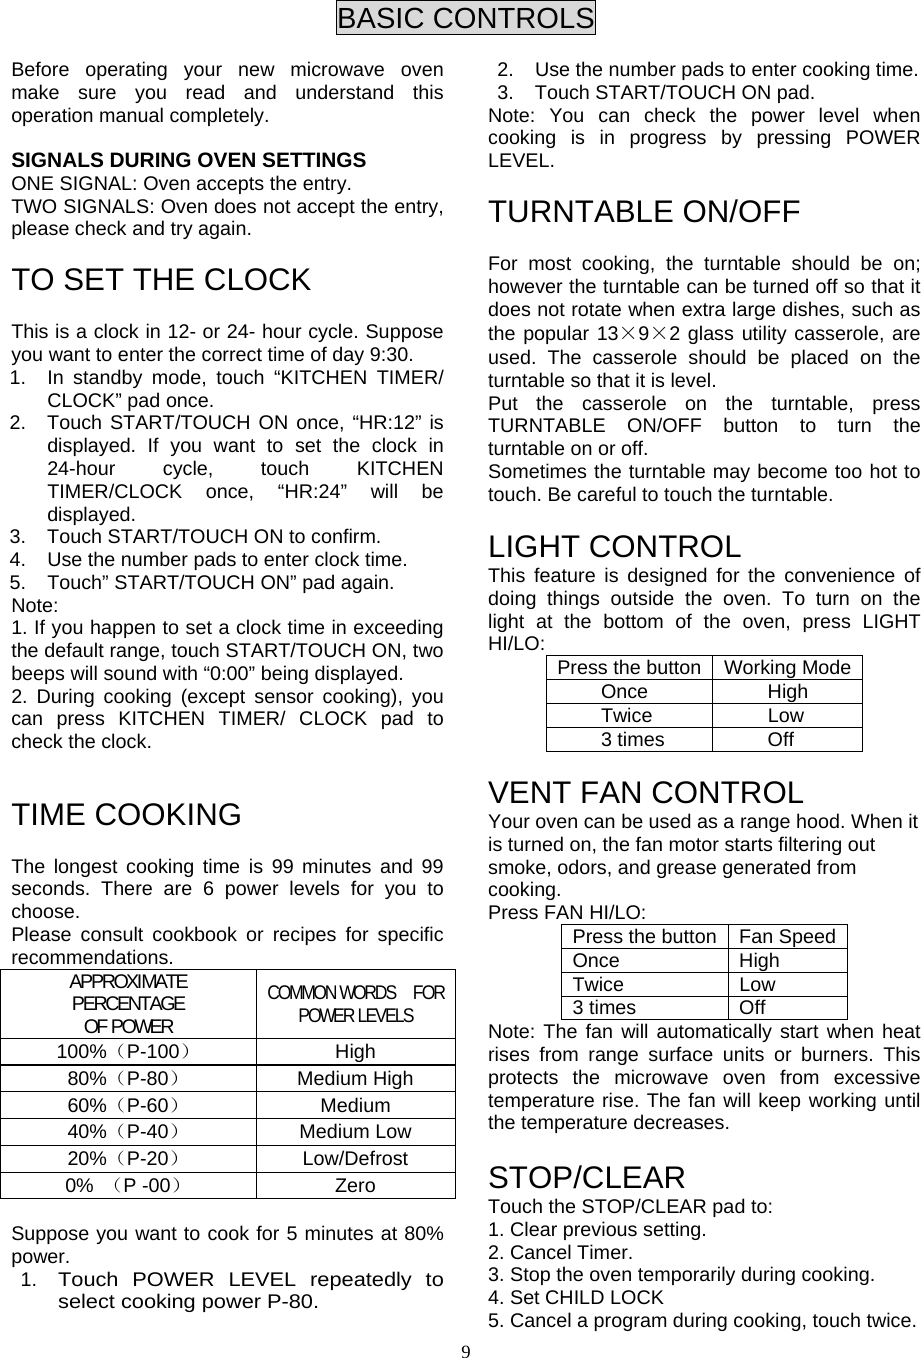  9 BASIC CONTROLS  Before operating your new microwave oven make sure you read and understand this operation manual completely.  SIGNALS DURING OVEN SETTINGS ONE SIGNAL: Oven accepts the entry. TWO SIGNALS: Oven does not accept the entry, please check and try again.  TO SET THE CLOCK  This is a clock in 12- or 24- hour cycle. Suppose you want to enter the correct time of day 9:30. 1.  In standby mode, touch “KITCHEN TIMER/ CLOCK” pad once. 2.  Touch START/TOUCH ON once, “HR:12” is displayed. If you want to set the clock in 24-hour cycle, touch KITCHEN TIMER/CLOCK once, “HR:24” will be displayed. 3.  Touch START/TOUCH ON to confirm. 4.  Use the number pads to enter clock time.   5.  Touch” START/TOUCH ON” pad again. Note:  1. If you happen to set a clock time in exceeding the default range, touch START/TOUCH ON, two beeps will sound with “0:00” being displayed. 2. During cooking (except sensor cooking), you can press KITCHEN TIMER/ CLOCK pad to check the clock.   TIME COOKING  The longest cooking time is 99 minutes and 99 seconds. There are 6 power levels for you to choose. Please consult cookbook or recipes for specific recommendations.  APPROXIMATE PERCENTAGE OF POWER COMMON WORDS  FOR POWER LEVELS 100%（P-100） High 80%（P-80） Medium High 60%（P-60） Medium 40%（P-40） Medium Low 20%（P-20） Low/Defrost 0%  （P -00） Zero  Suppose you want to cook for 5 minutes at 80% power. 1. Touch POWER LEVEL repeatedly to select cooking power P-80. 2.  Use the number pads to enter cooking time. 3.  Touch START/TOUCH ON pad. Note: You can check the power level when cooking is in progress by pressing POWER LEVEL.  TURNTABLE ON/OFF  For most cooking, the turntable should be on; however the turntable can be turned off so that it does not rotate when extra large dishes, such as the popular 13×9×2 glass utility casserole, are used. The casserole should be placed on the turntable so that it is level. Put the casserole on the turntable, press TURNTABLE ON/OFF button to turn the turntable on or off. Sometimes the turntable may become too hot to touch. Be careful to touch the turntable.  LIGHT CONTROL This feature is designed for the convenience of doing things outside the oven. To turn on the light at the bottom of the oven, press LIGHT HI/LO:  Press the button Working Mode Once High Twice Low 3 times  Off  VENT FAN CONTROL Your oven can be used as a range hood. When it is turned on, the fan motor starts filtering out smoke, odors, and grease generated from cooking. Press FAN HI/LO: Press the button Fan Speed Once High  Twice Low 3 times  Off Note: The fan will automatically start when heat rises from range surface units or burners. This protects the microwave oven from excessive temperature rise. The fan will keep working until the temperature decreases.  STOP/CLEAR Touch the STOP/CLEAR pad to: 1. Clear previous setting. 2. Cancel Timer. 3. Stop the oven temporarily during cooking. 4. Set CHILD LOCK 5. Cancel a program during cooking, touch twice. 